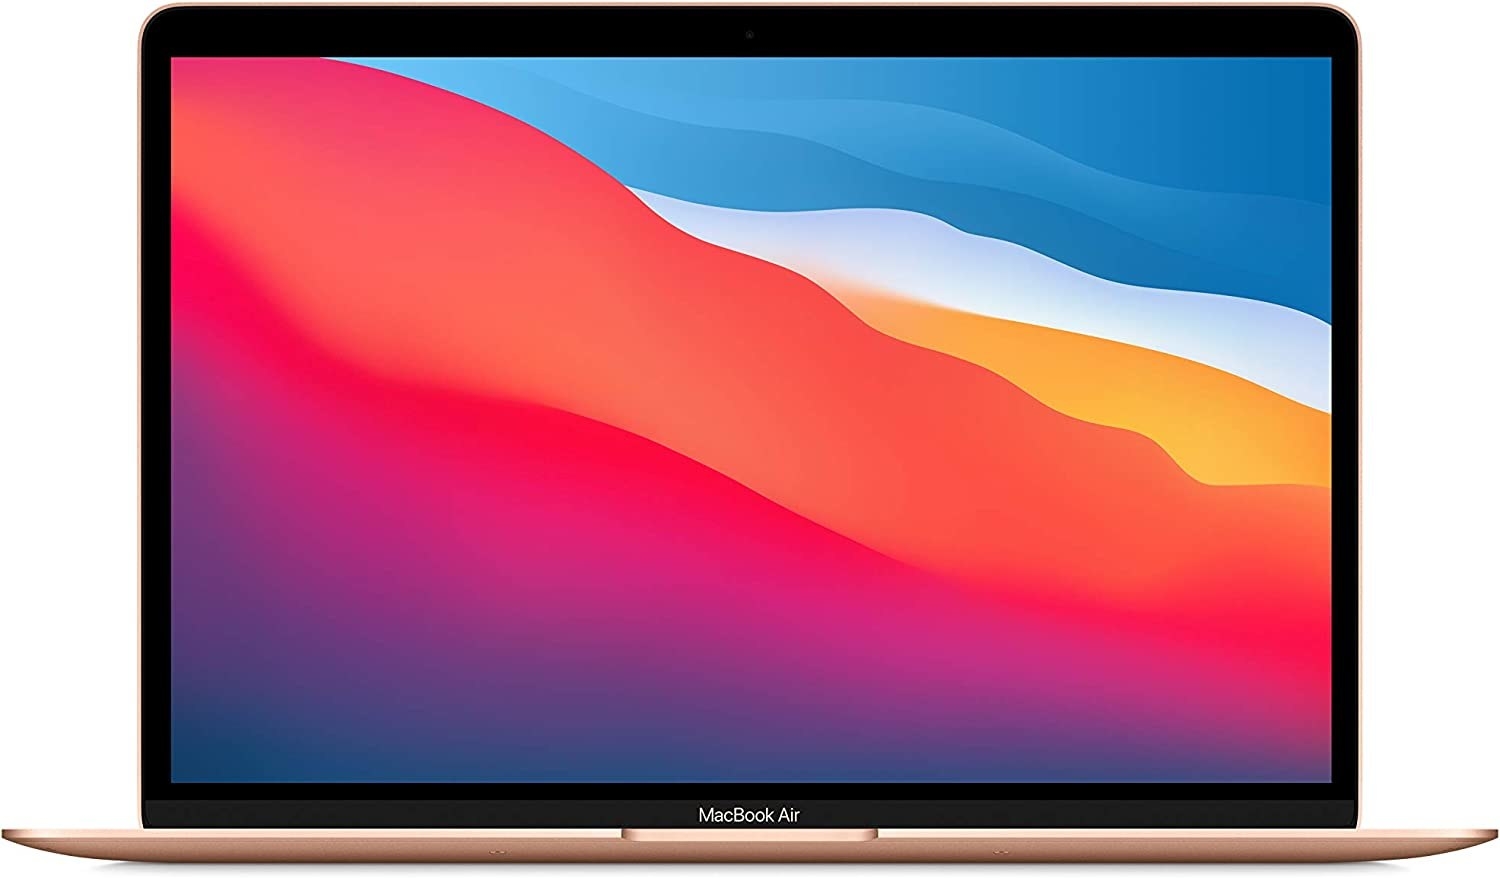 the rose gold laptop